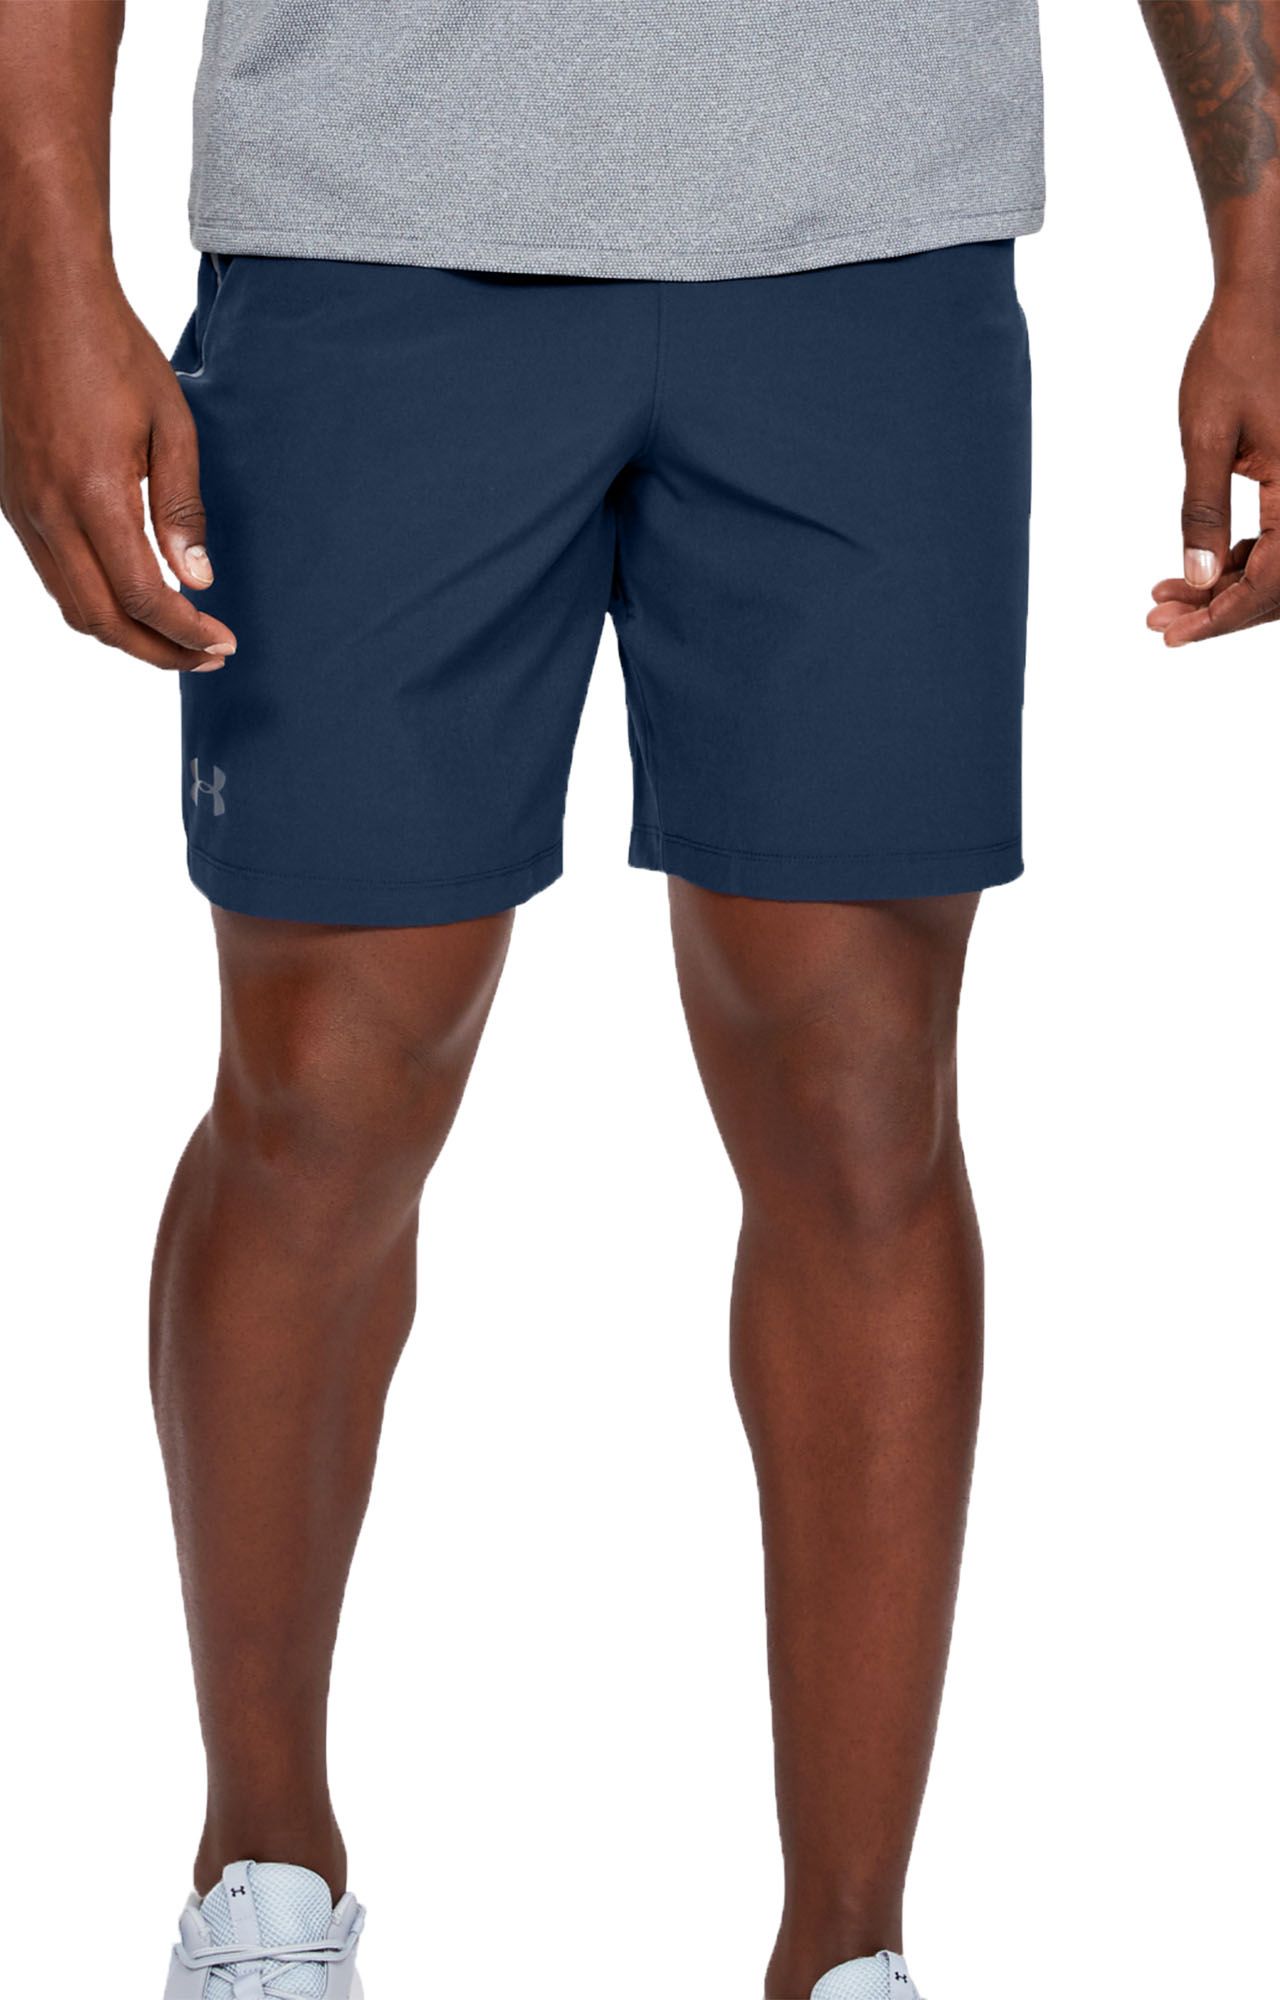 under armor workout shorts